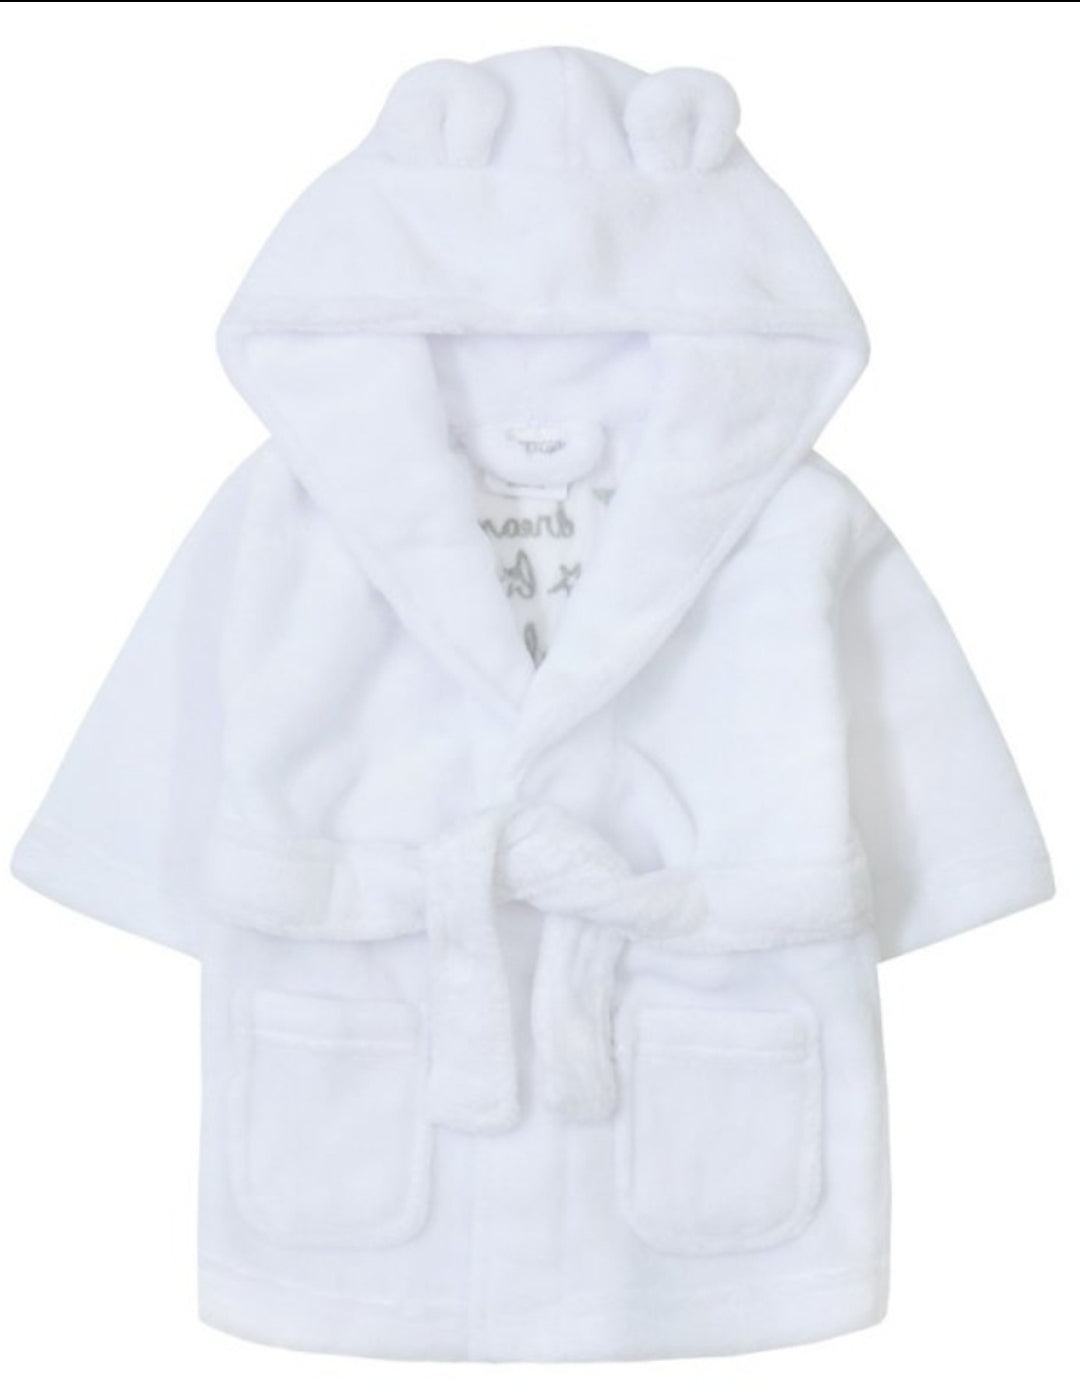 Baby's Dream Big Little One White Dressing Gown